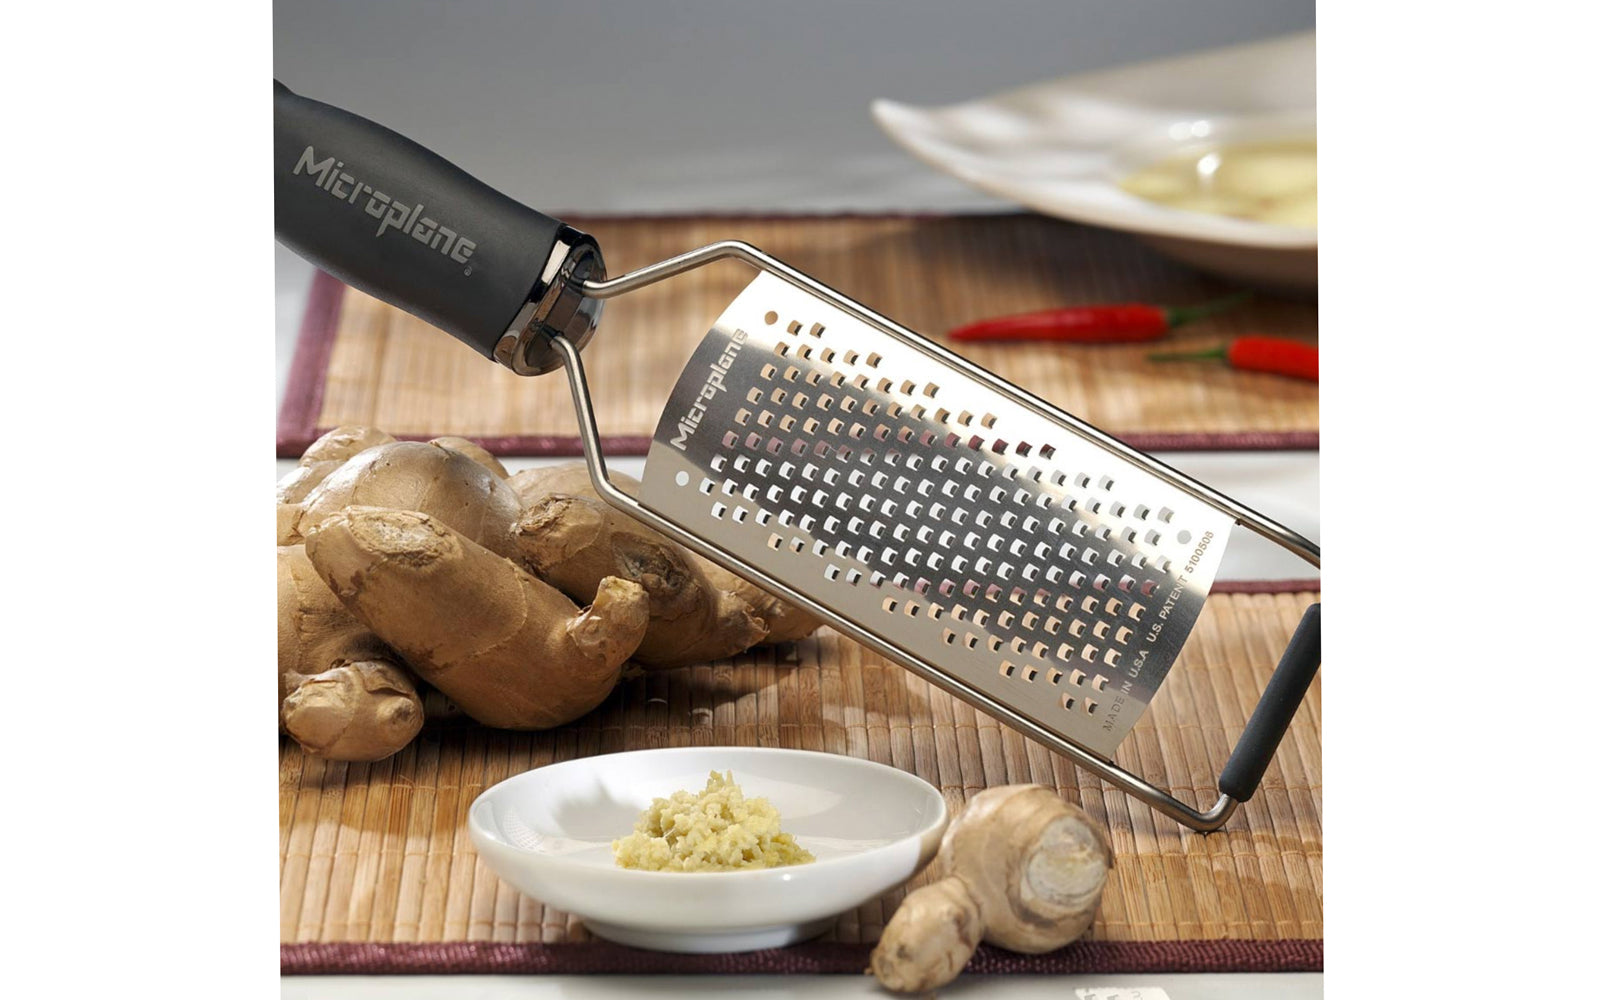 Made in USA - Blade made in USA - Great for grating hard cheese, carrots, garlic, chocolate, coconut - Non-slip grip - Dishwasher safe - Razor-sharp blades made from stainless steel - 18/8 grade - Ergonomically designed handle ~ No-slip base - Gourmet Series Coarse Grater - 098399450001 - non-skid foot -  Model 45004